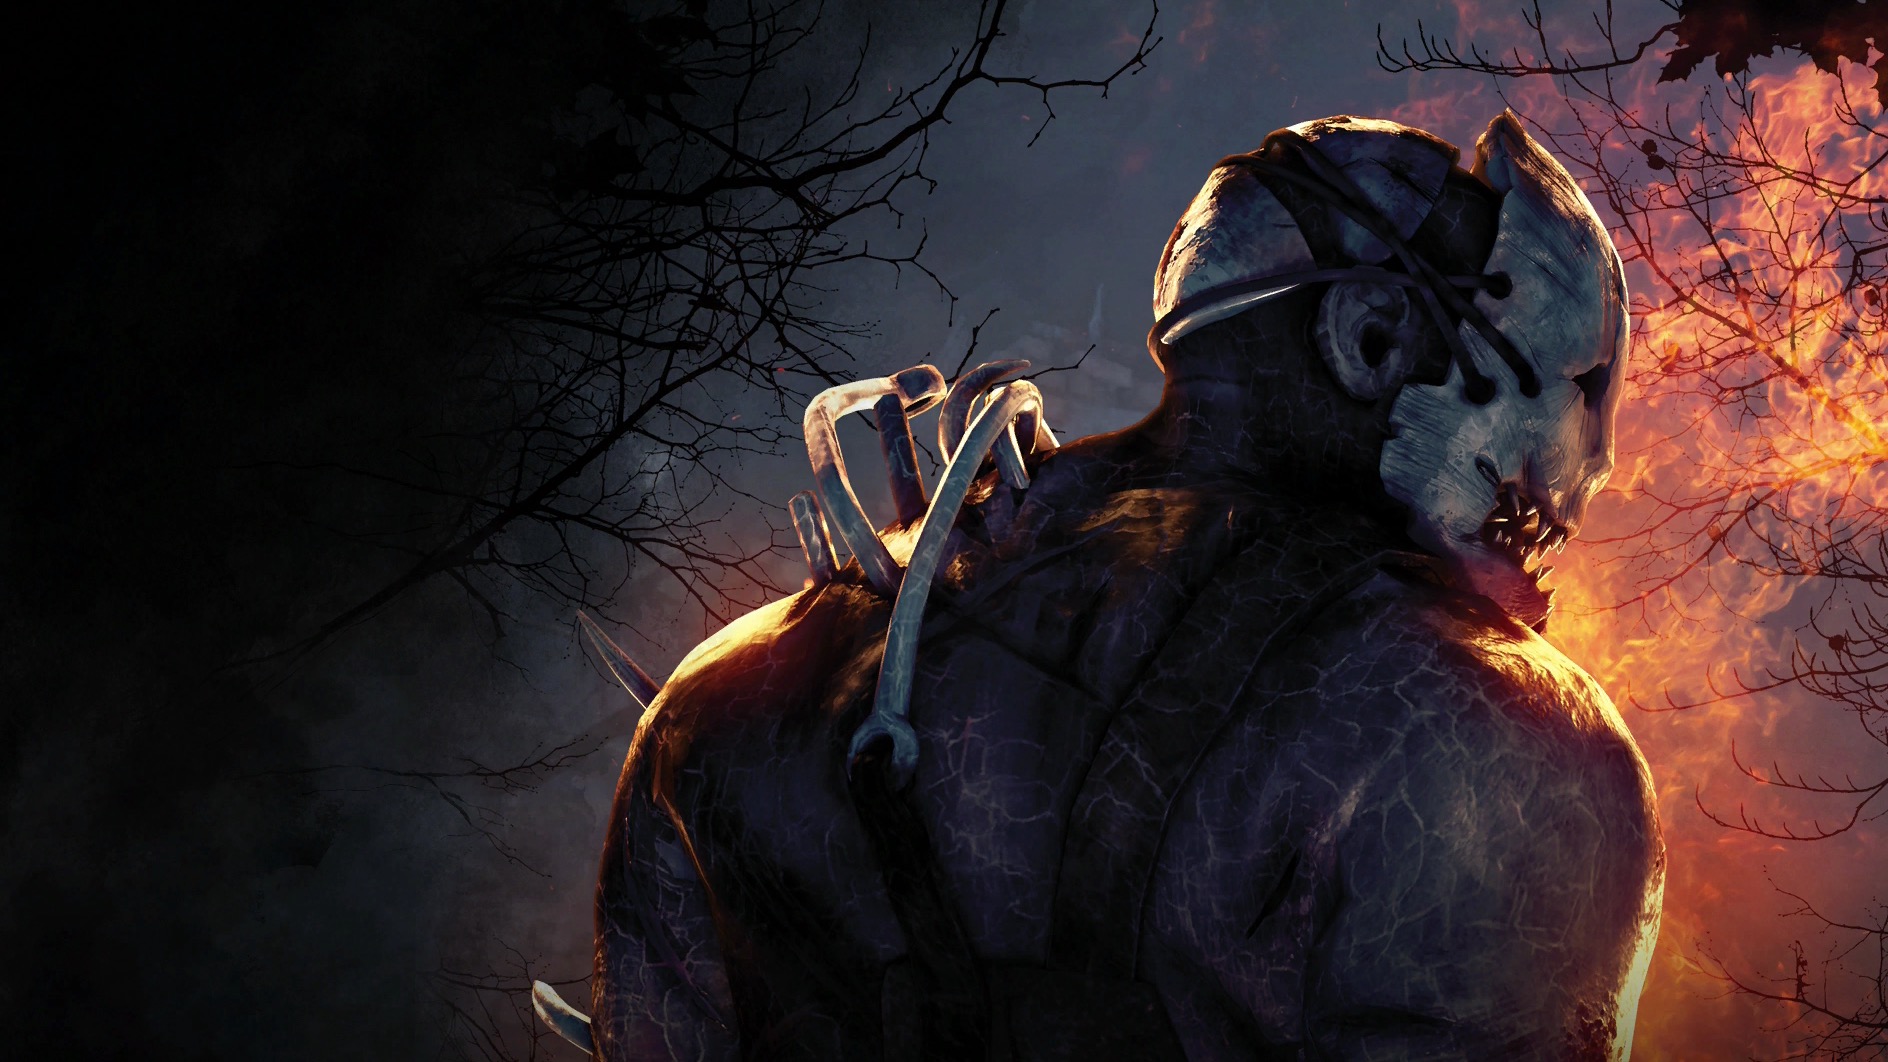 Dead by Daylight received a new modifier - Lights Out, which will plunge the game map into darkness